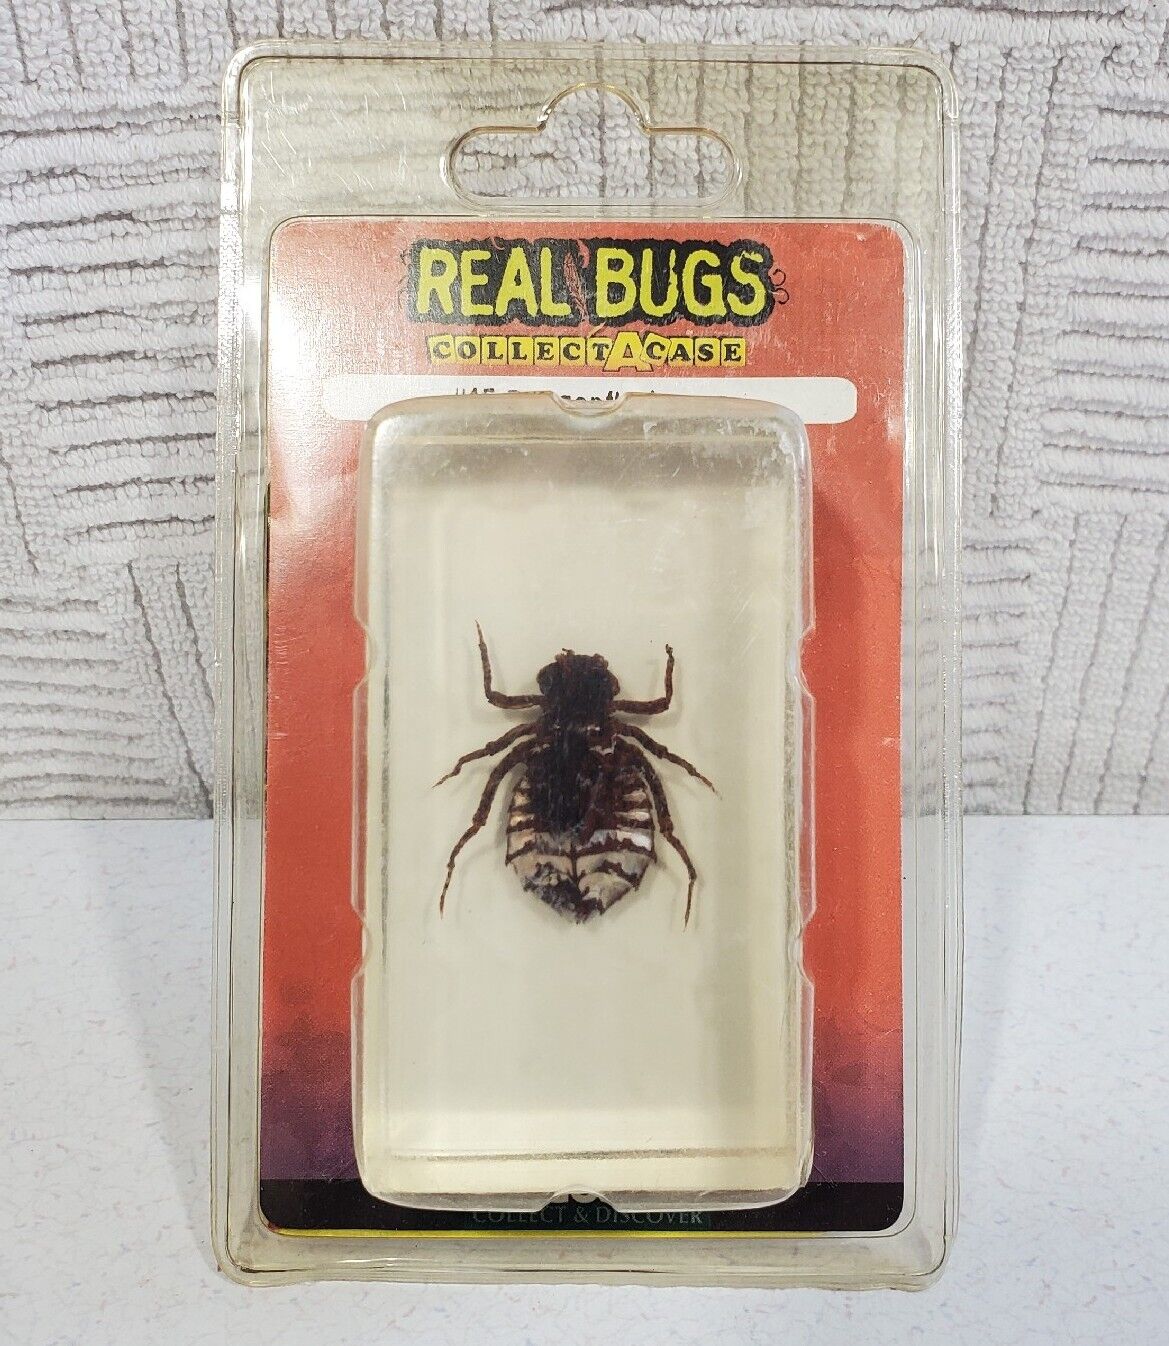 REAL BUGS In Resin DeAgostini COLLECT A CASE #18 Dragonfly Larvae New Bug